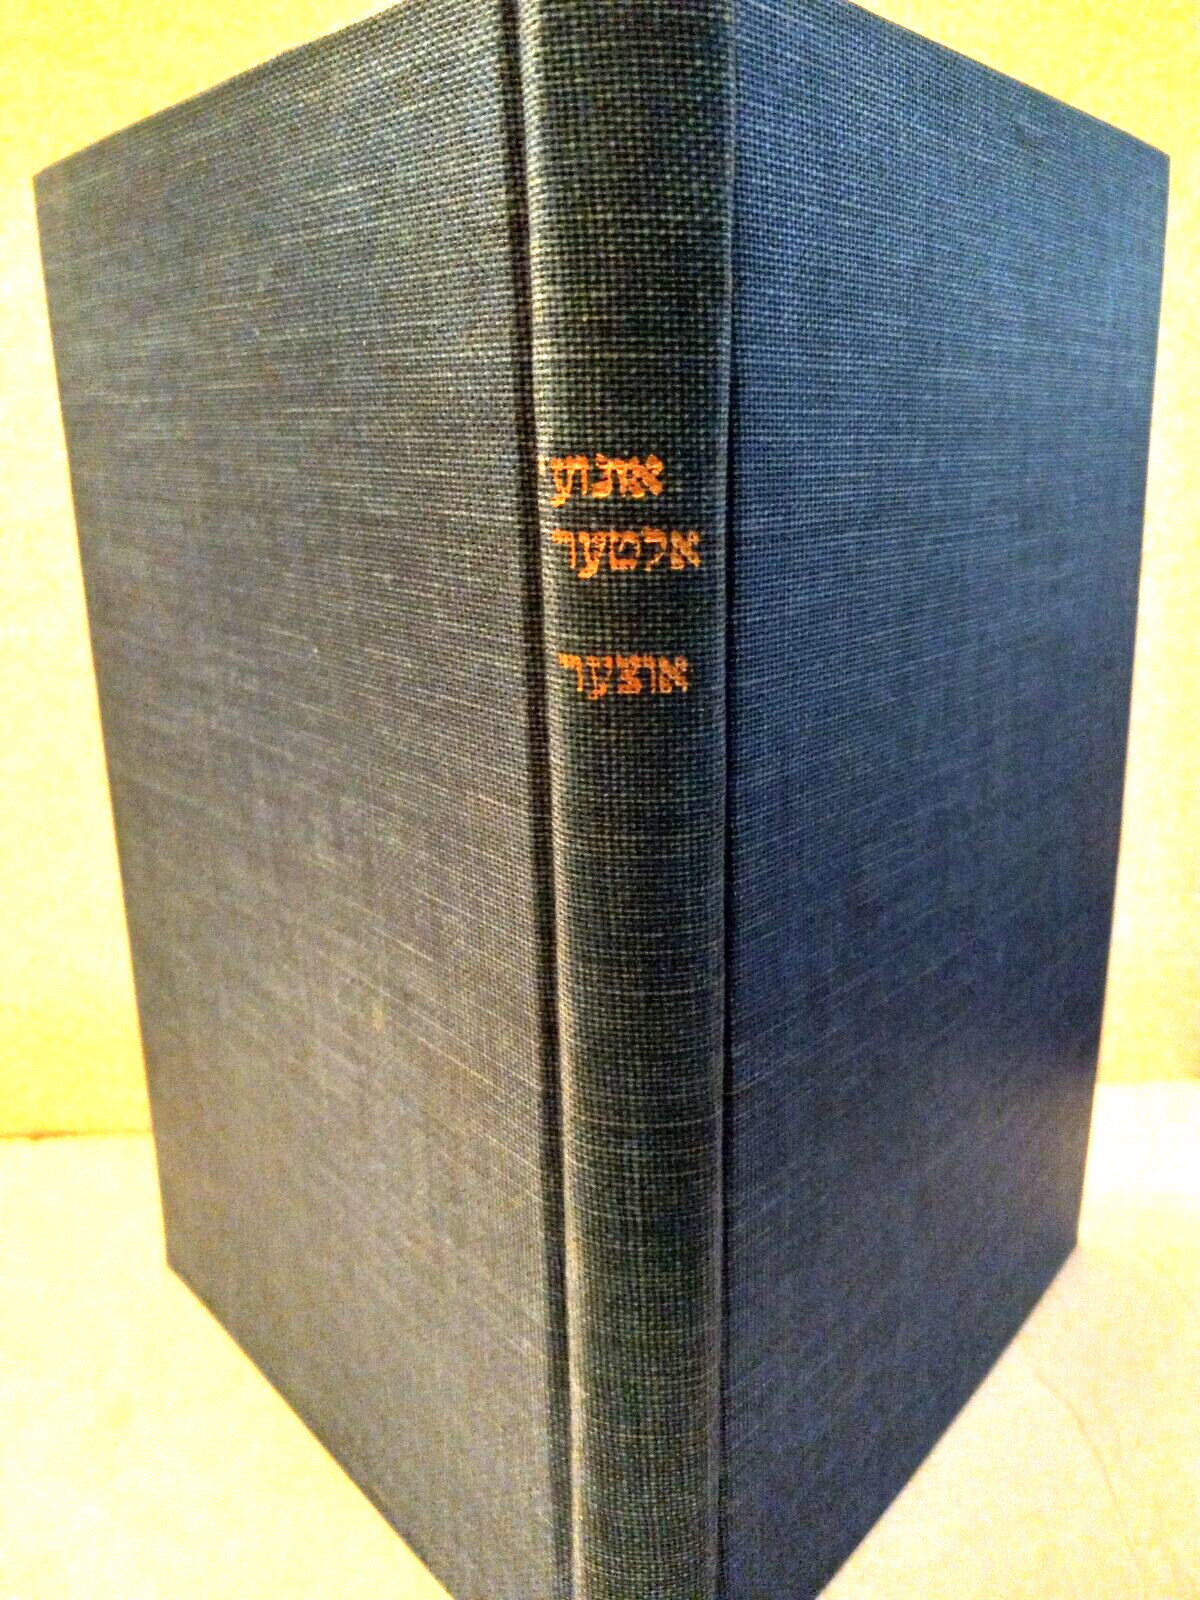 VINTAGE HEBREW YIDDISH COMMENTARY HB BOOK OF BIBLE WARSAW POLAND 1936 REBOUND